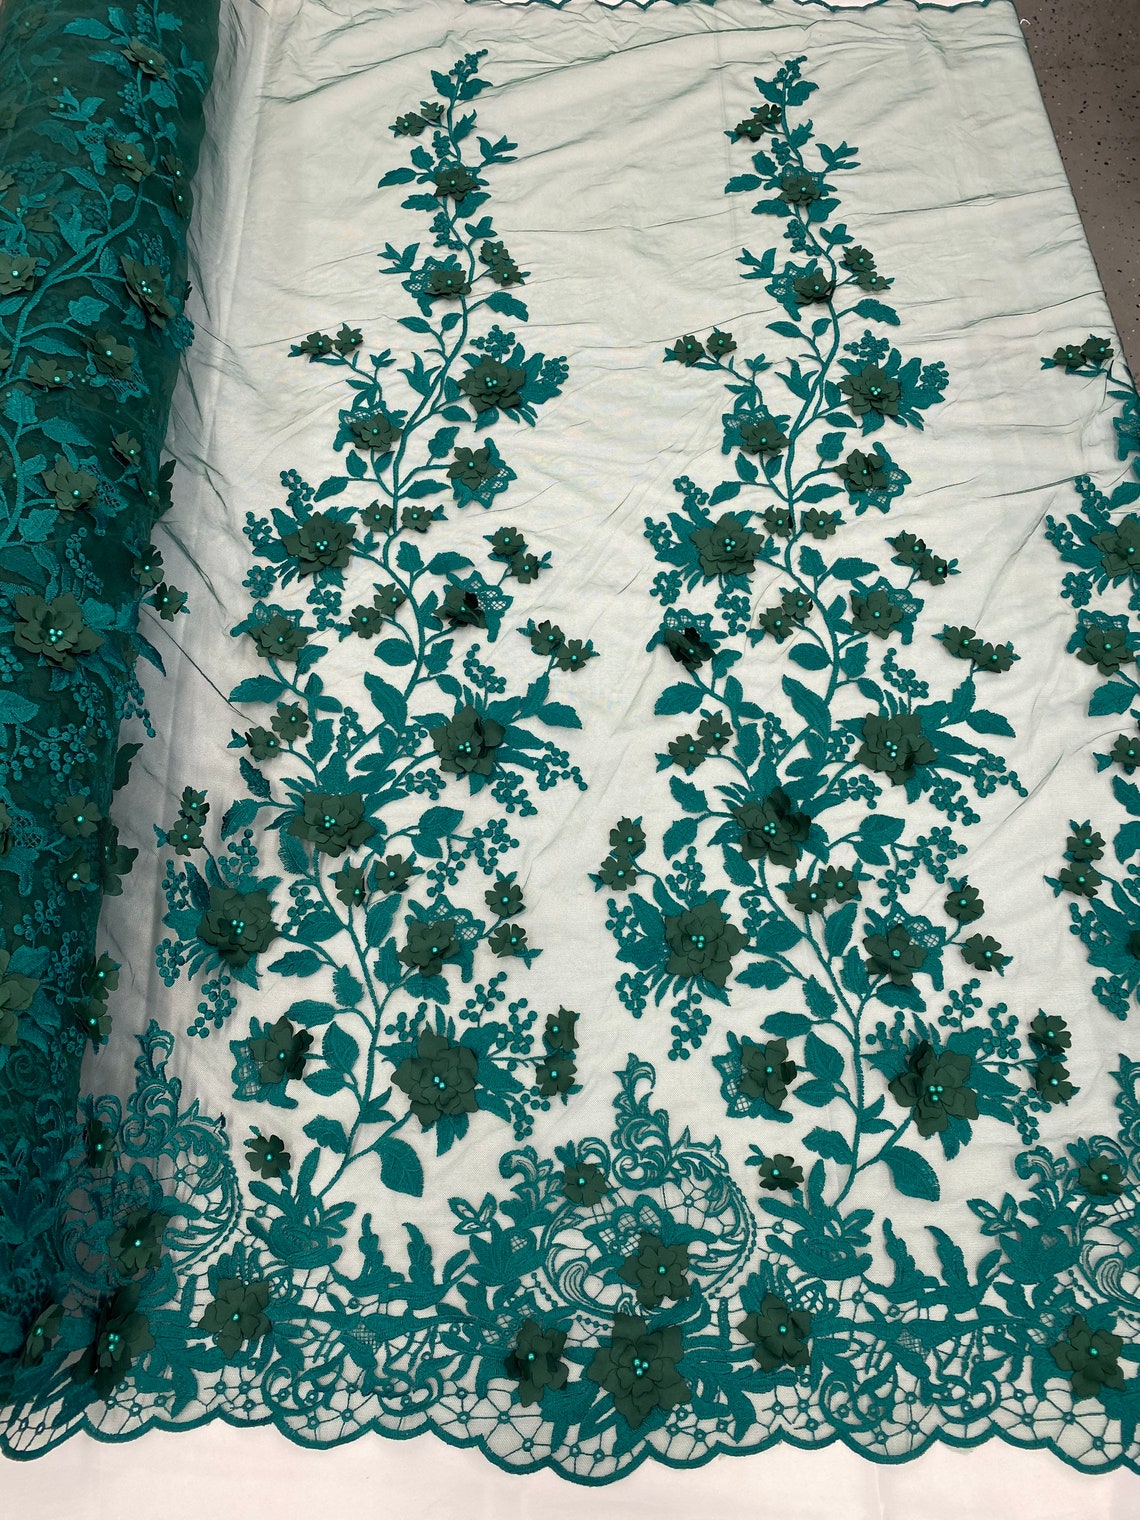 3D Floral Princess Fabric - Teal - Embroidered Floral Lace Fabric with 3D Flowers By Yard